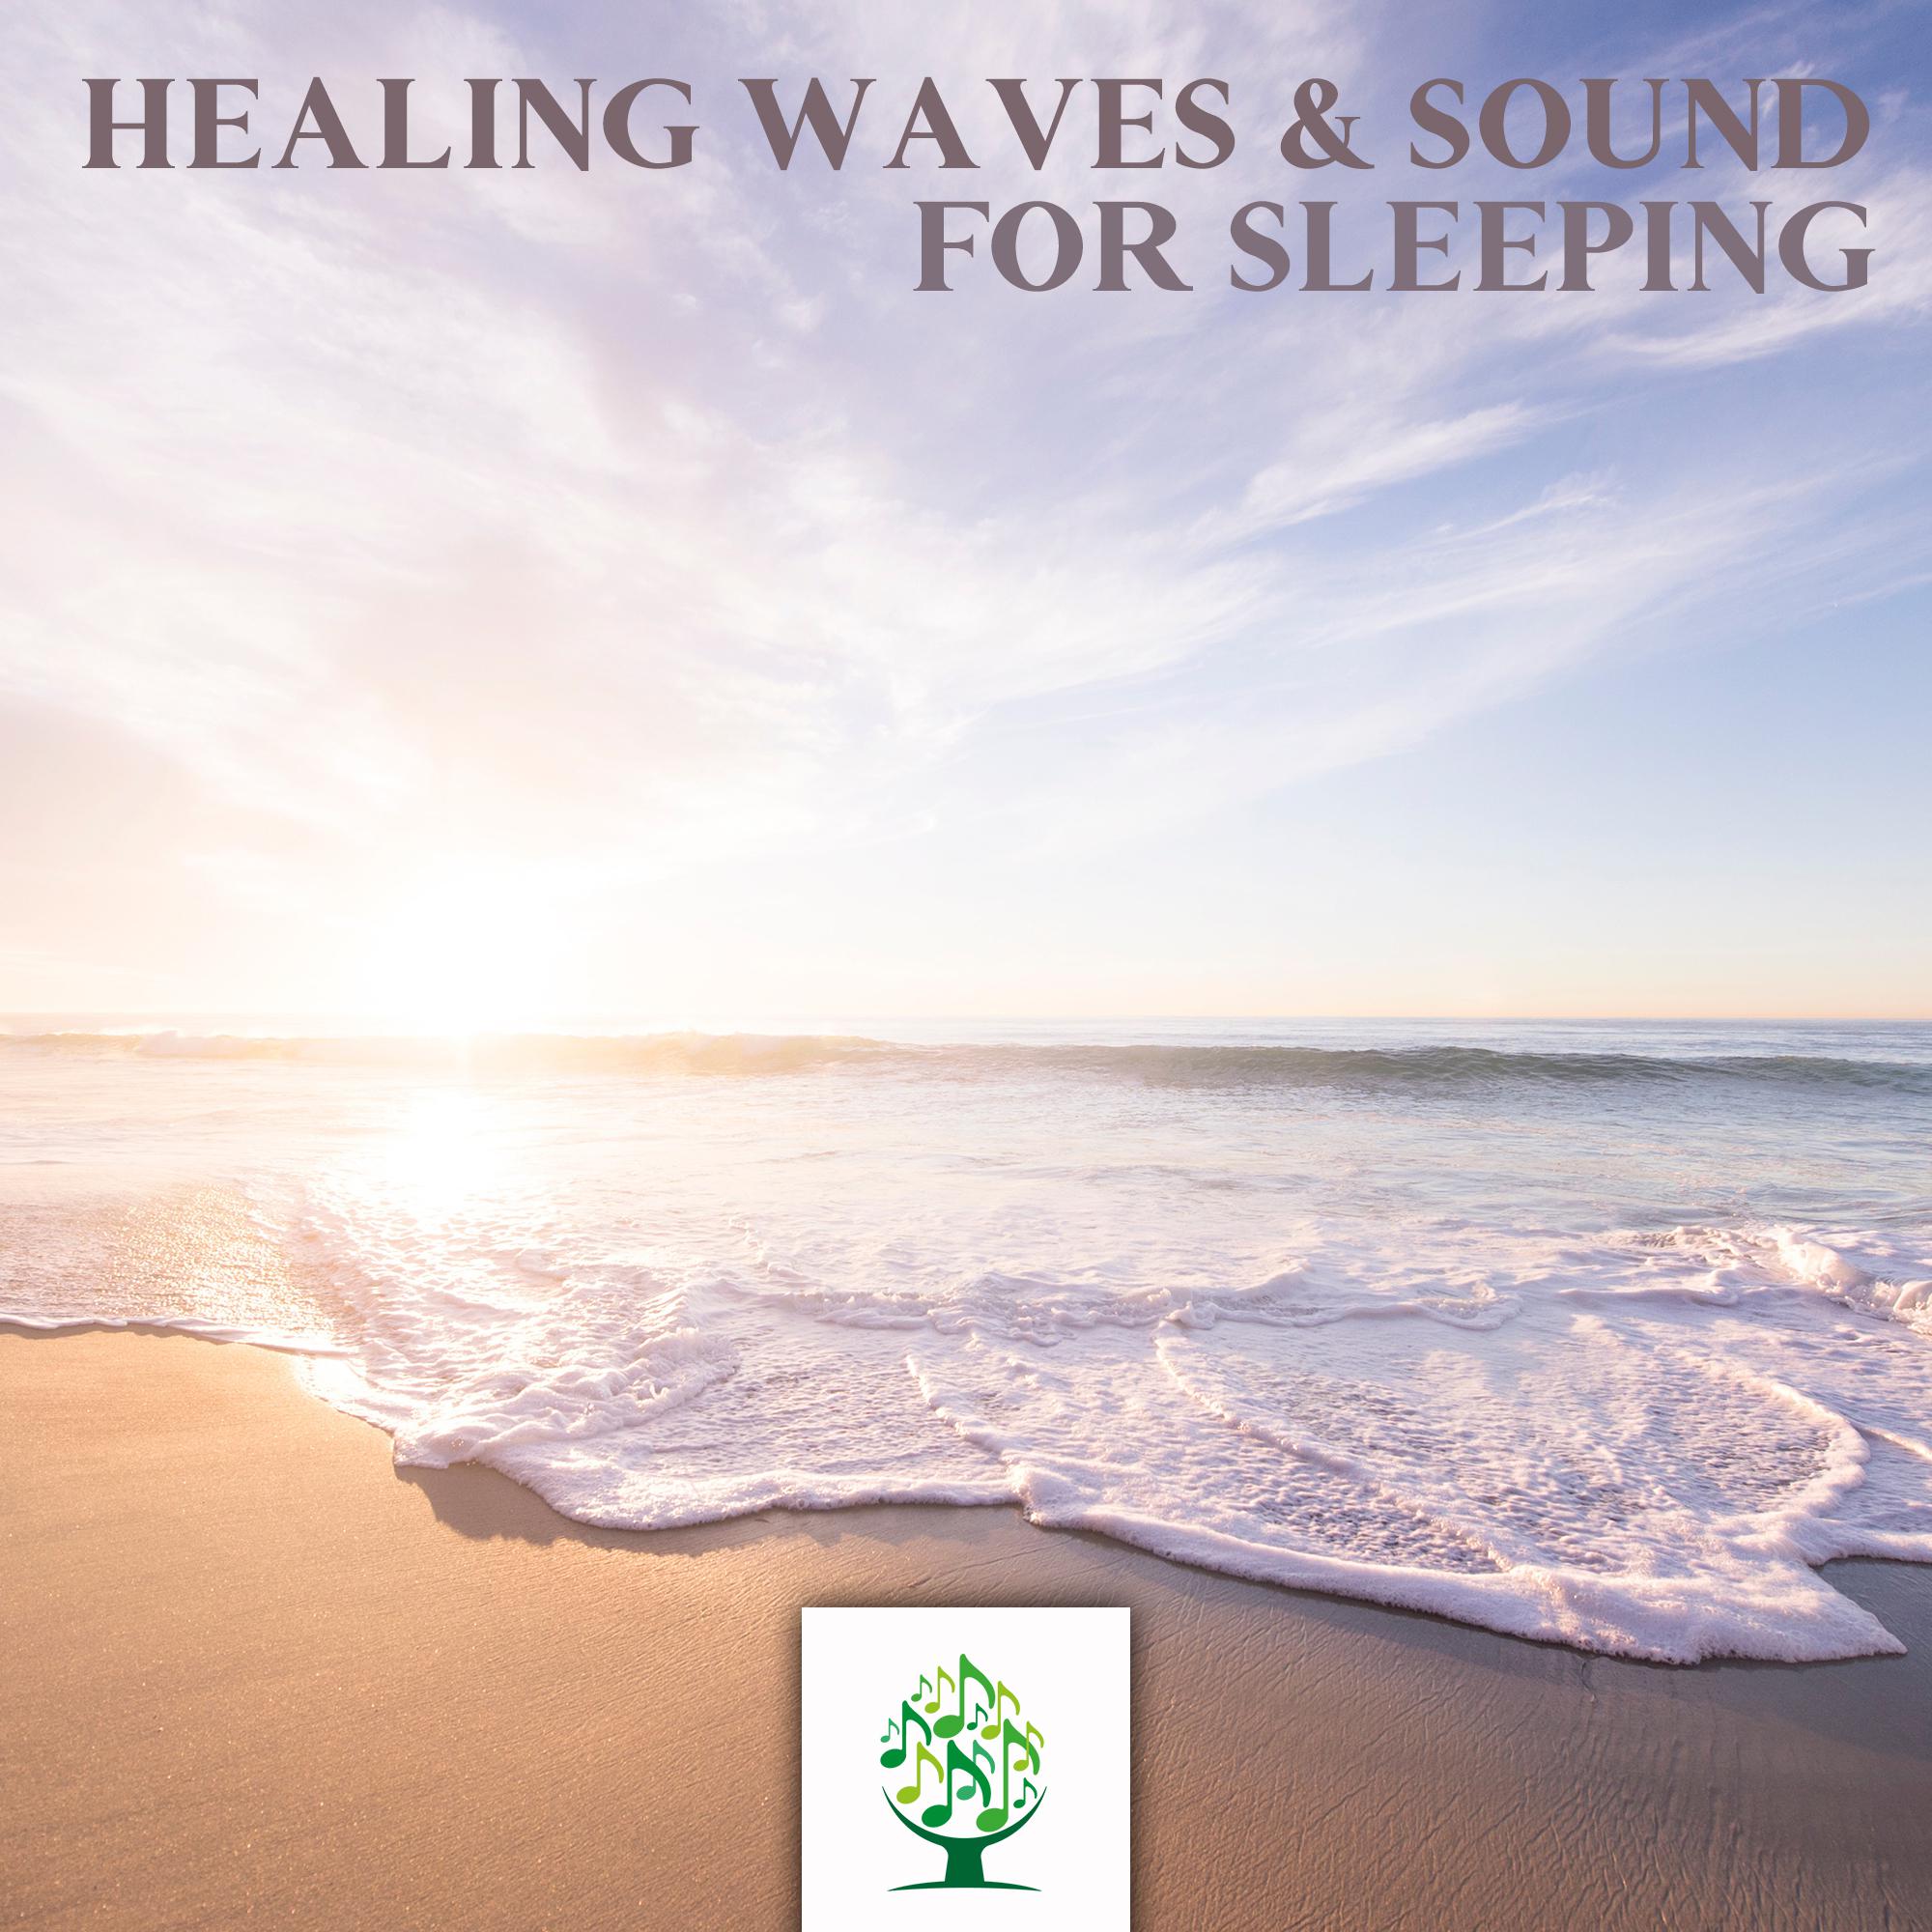 Healing Waves & Sound for Sleeping